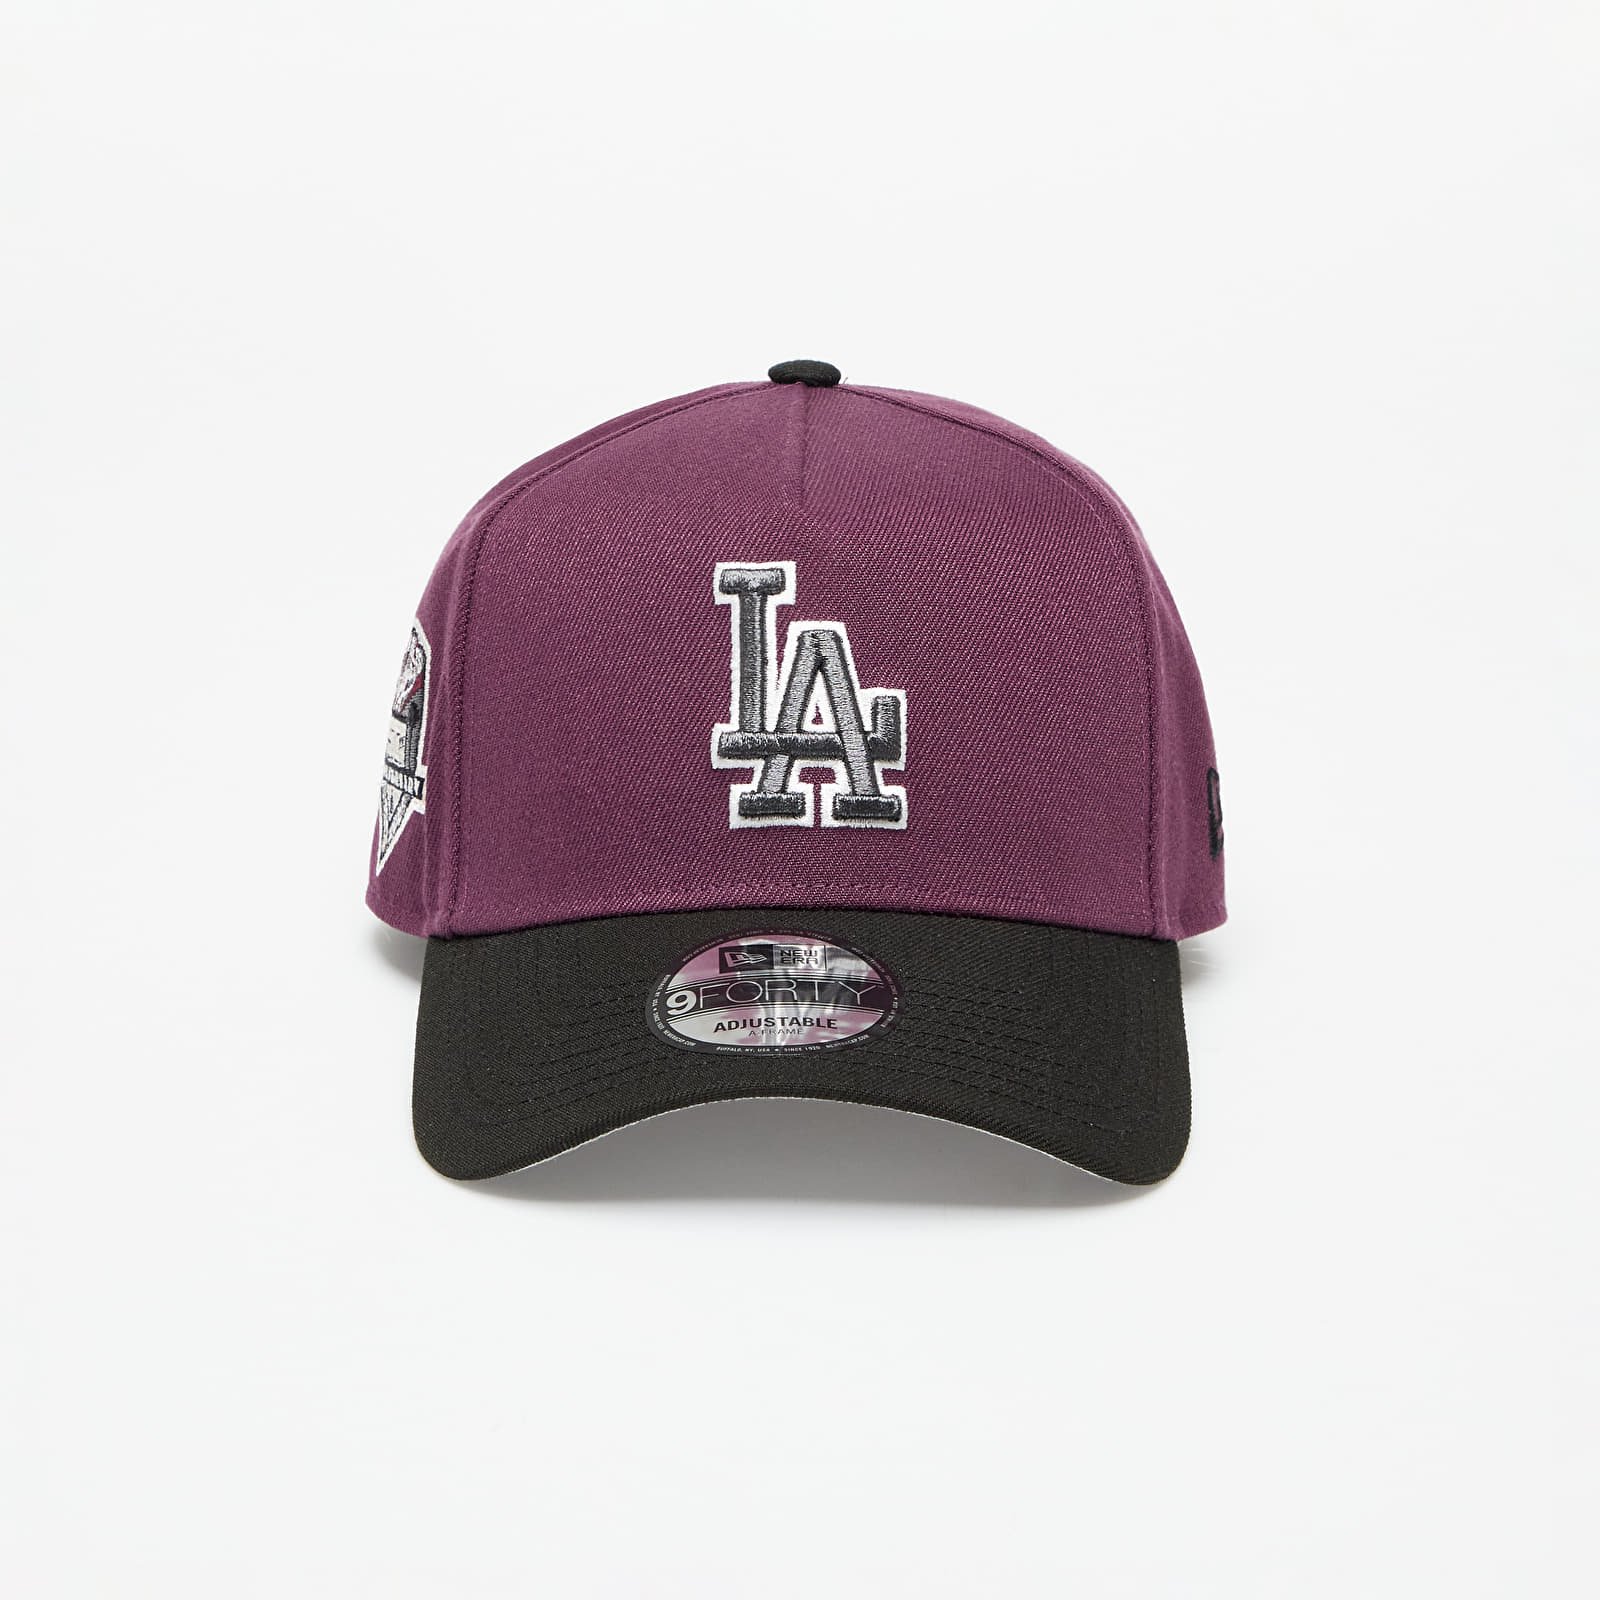 Los Angeles Dodgers 9FORTY Two-Tone A-Frame Adjustable Cap Dark Purple